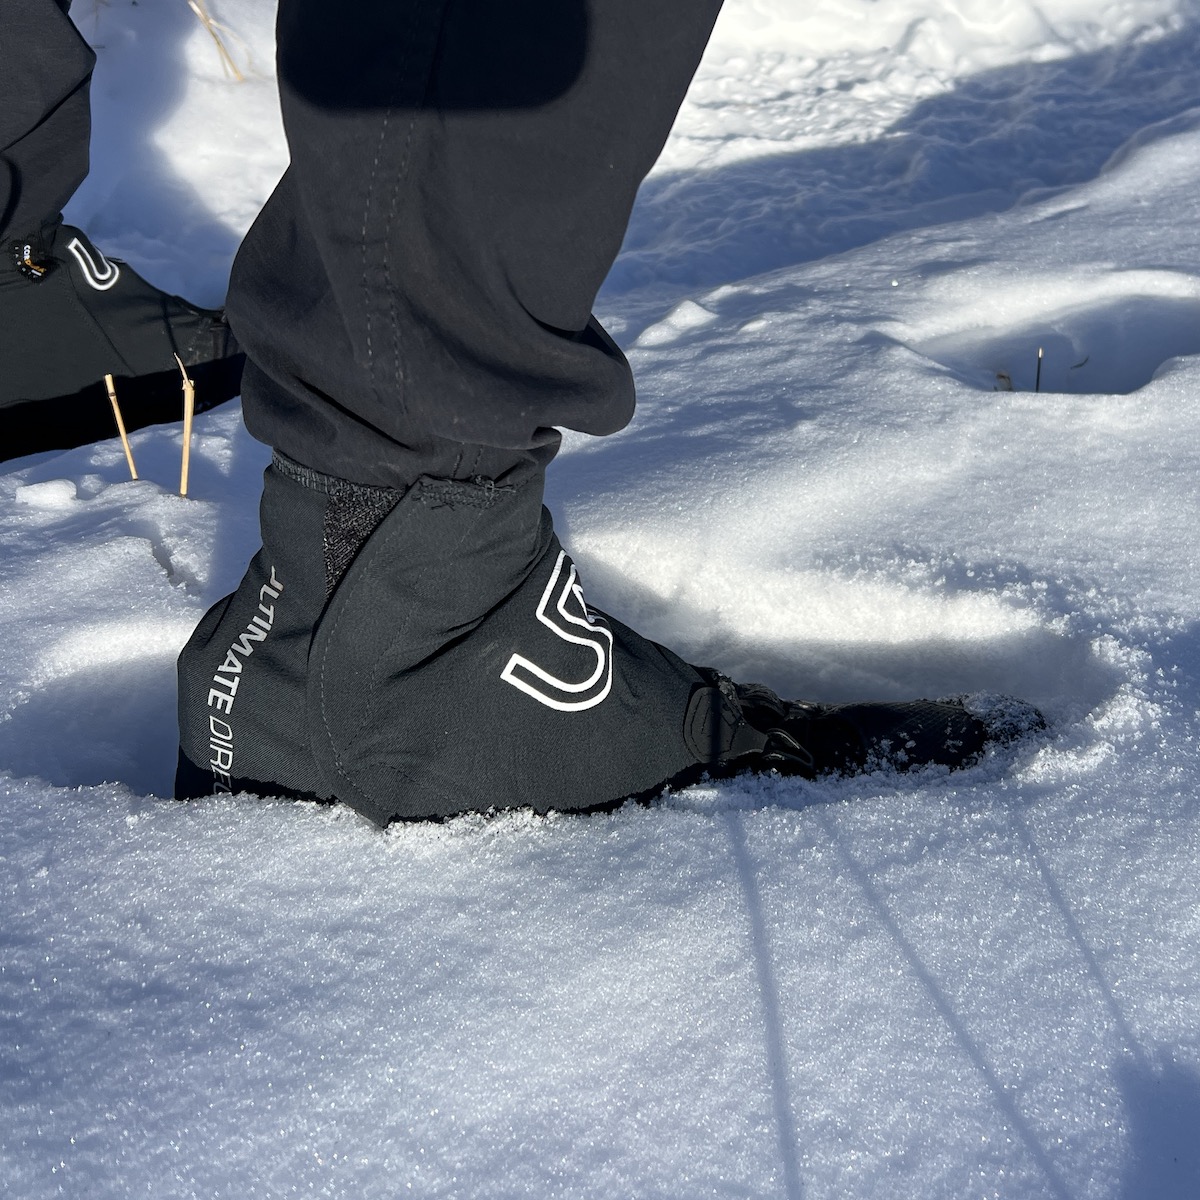 Ultimate Direction FK Gaiters - in snow